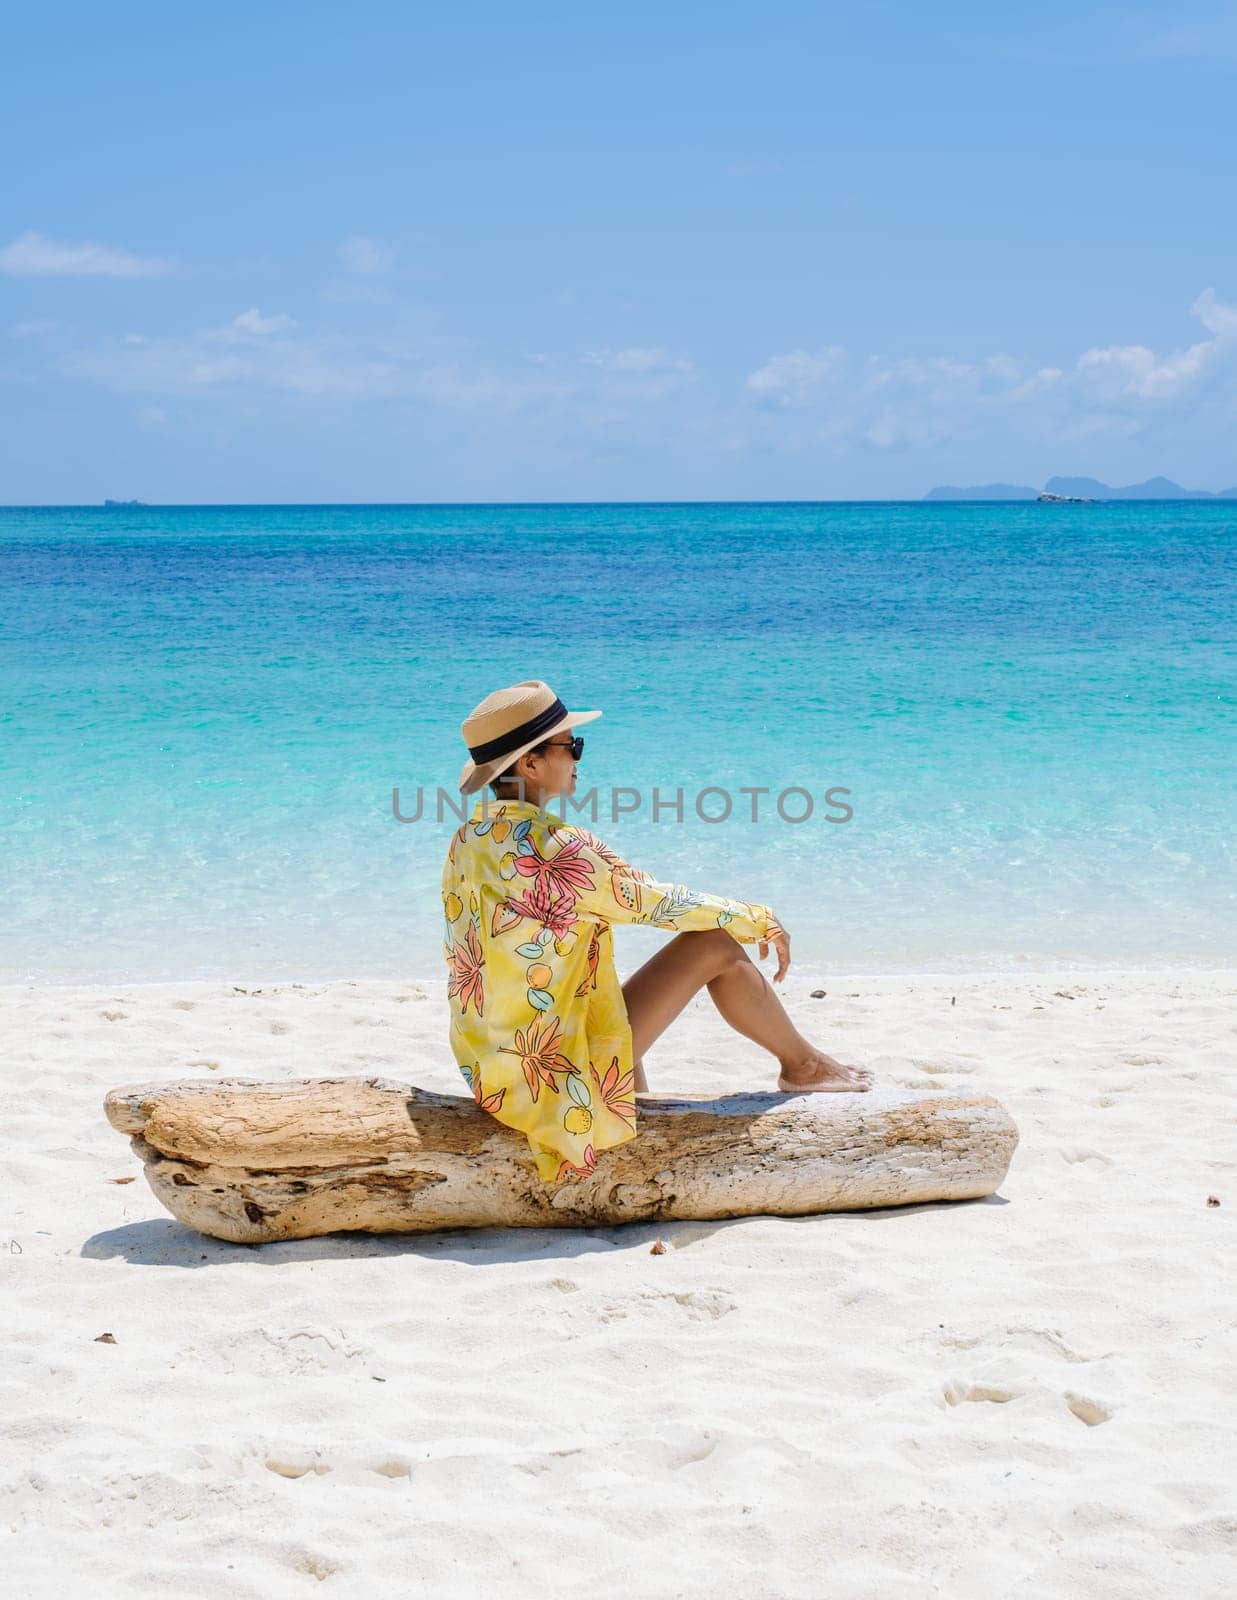 Koh Lipe Island Southern Thailand with turqouse colored ocean and white sandy beach at Ko Lipe. a Asian women on vacation in Thailand walking at the beach